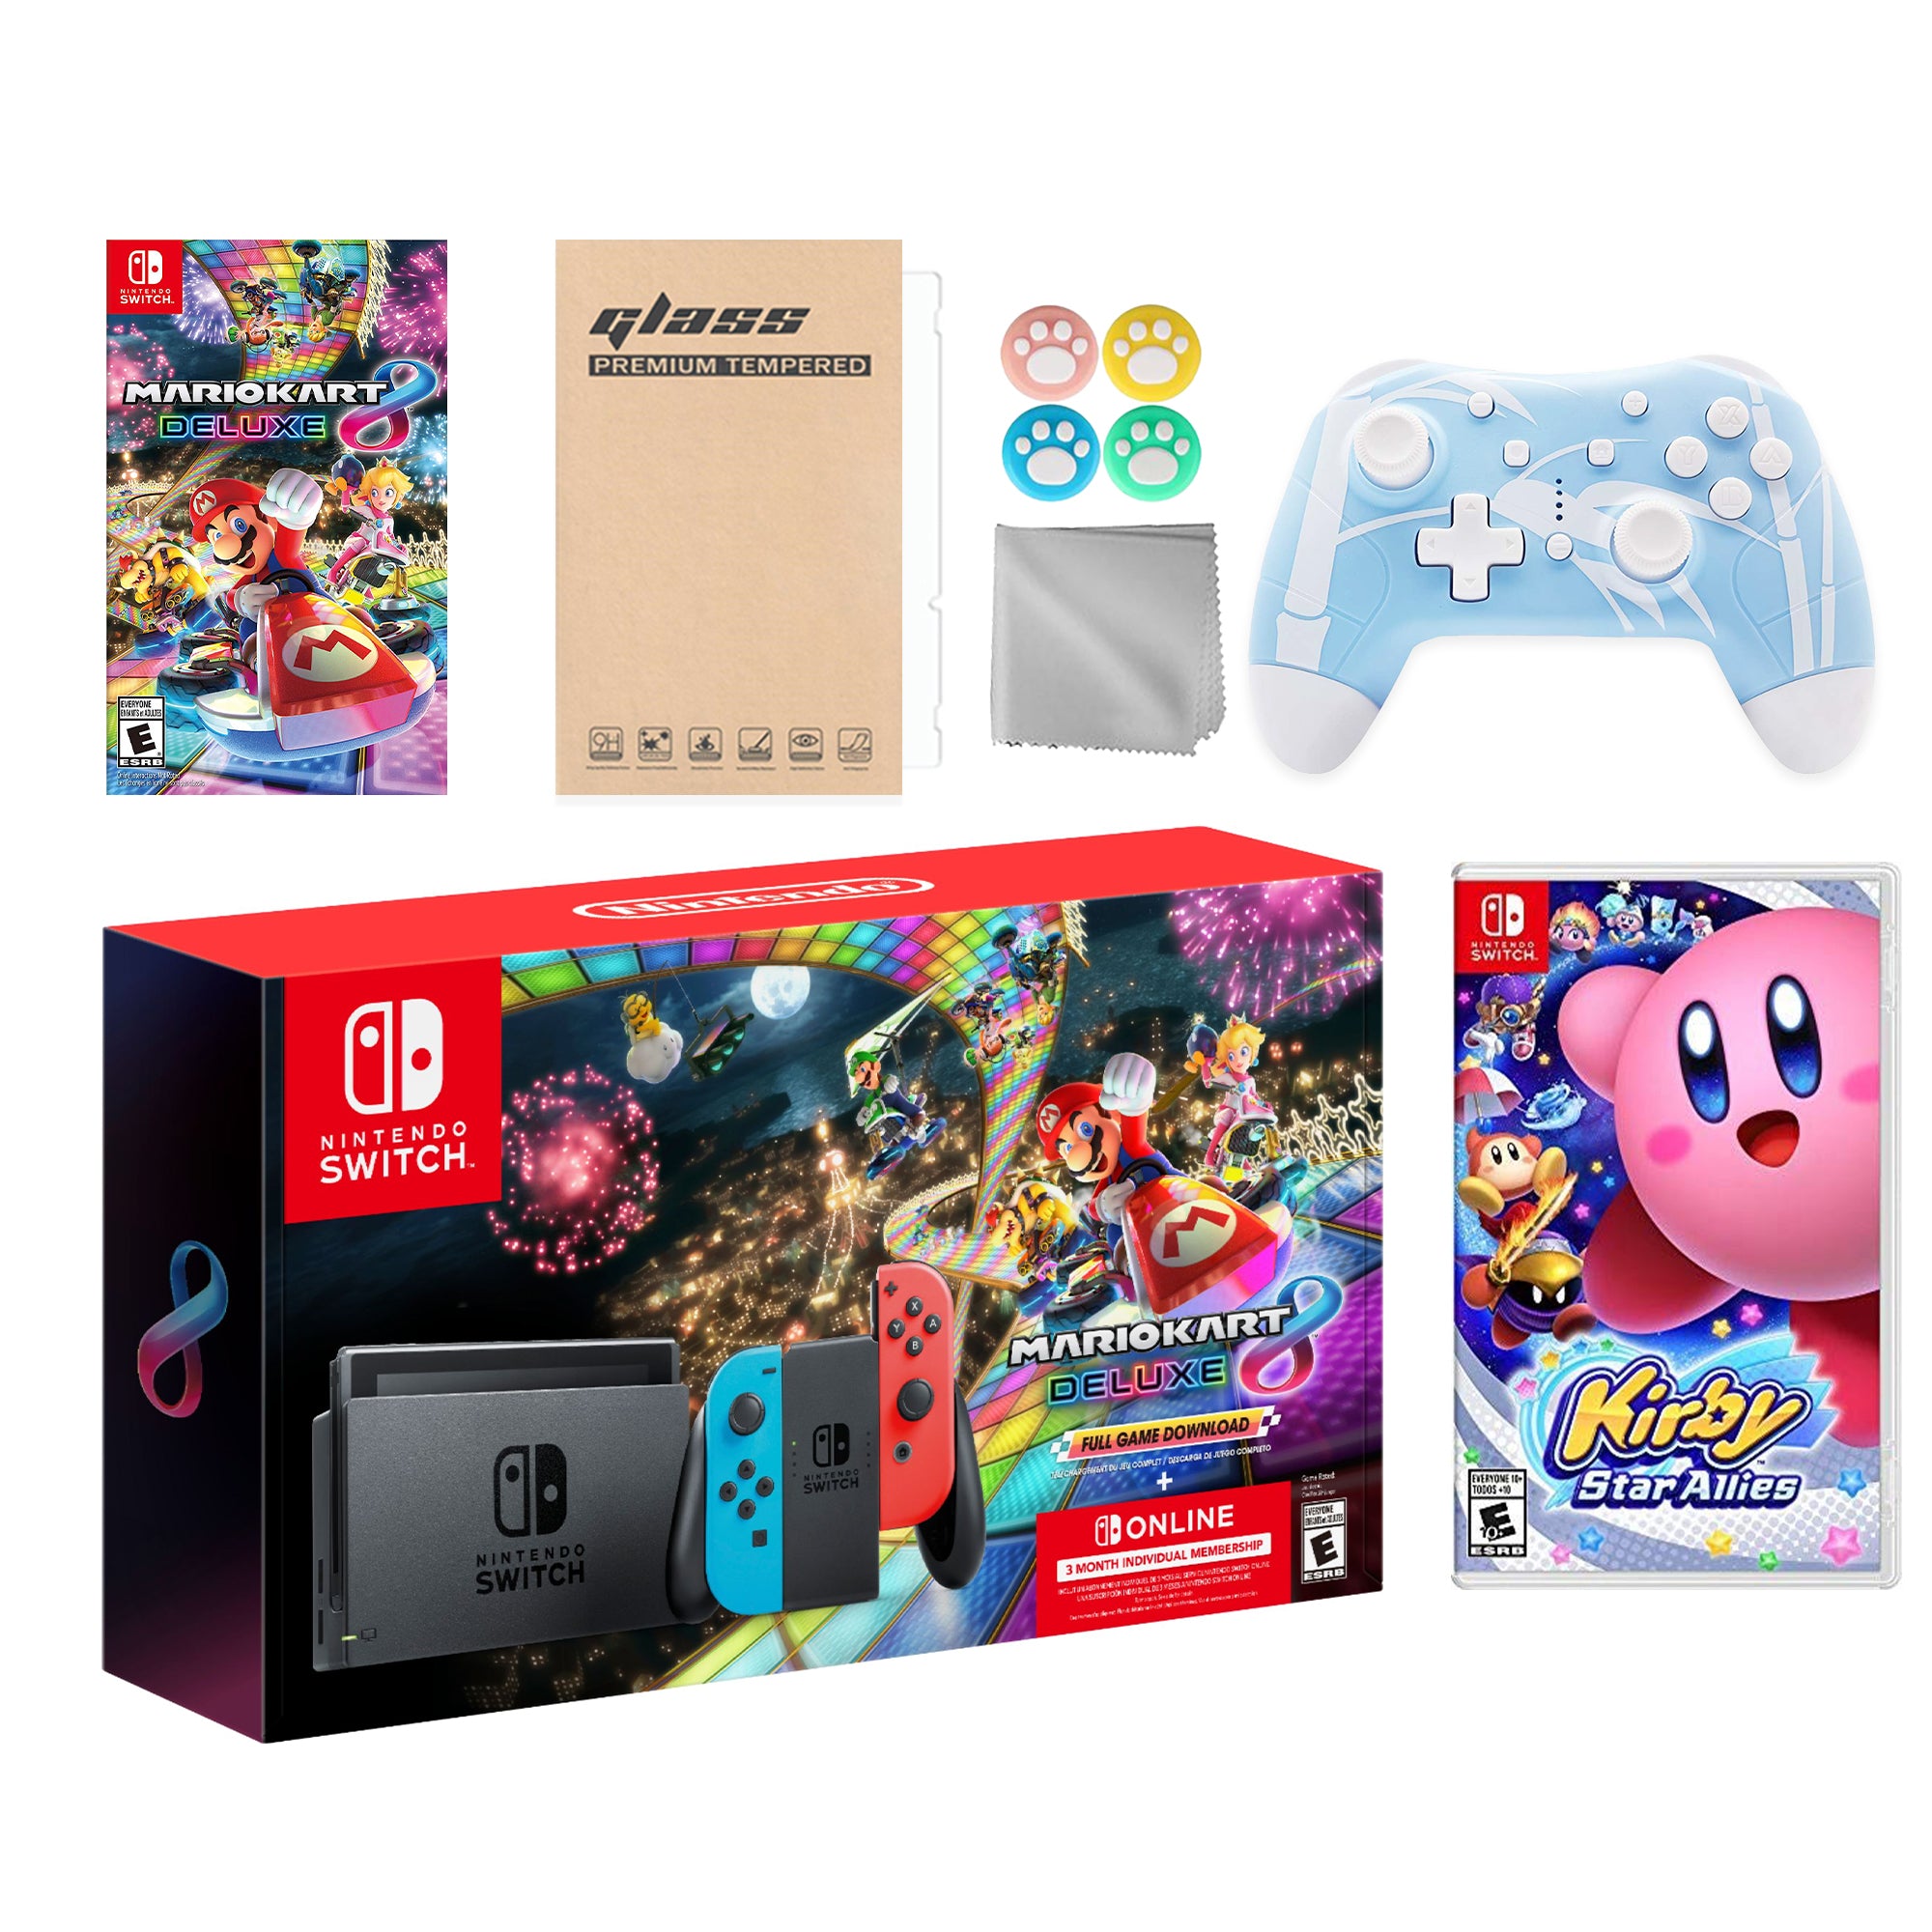 Nintendo Switch Mario Kart 8 Deluxe Bundle: Red Blue Console, Mario Kart 8 & Membership, Kirby Star Allies, Mytrix Wireless Pro Controller Blue Bamboo and Accessories